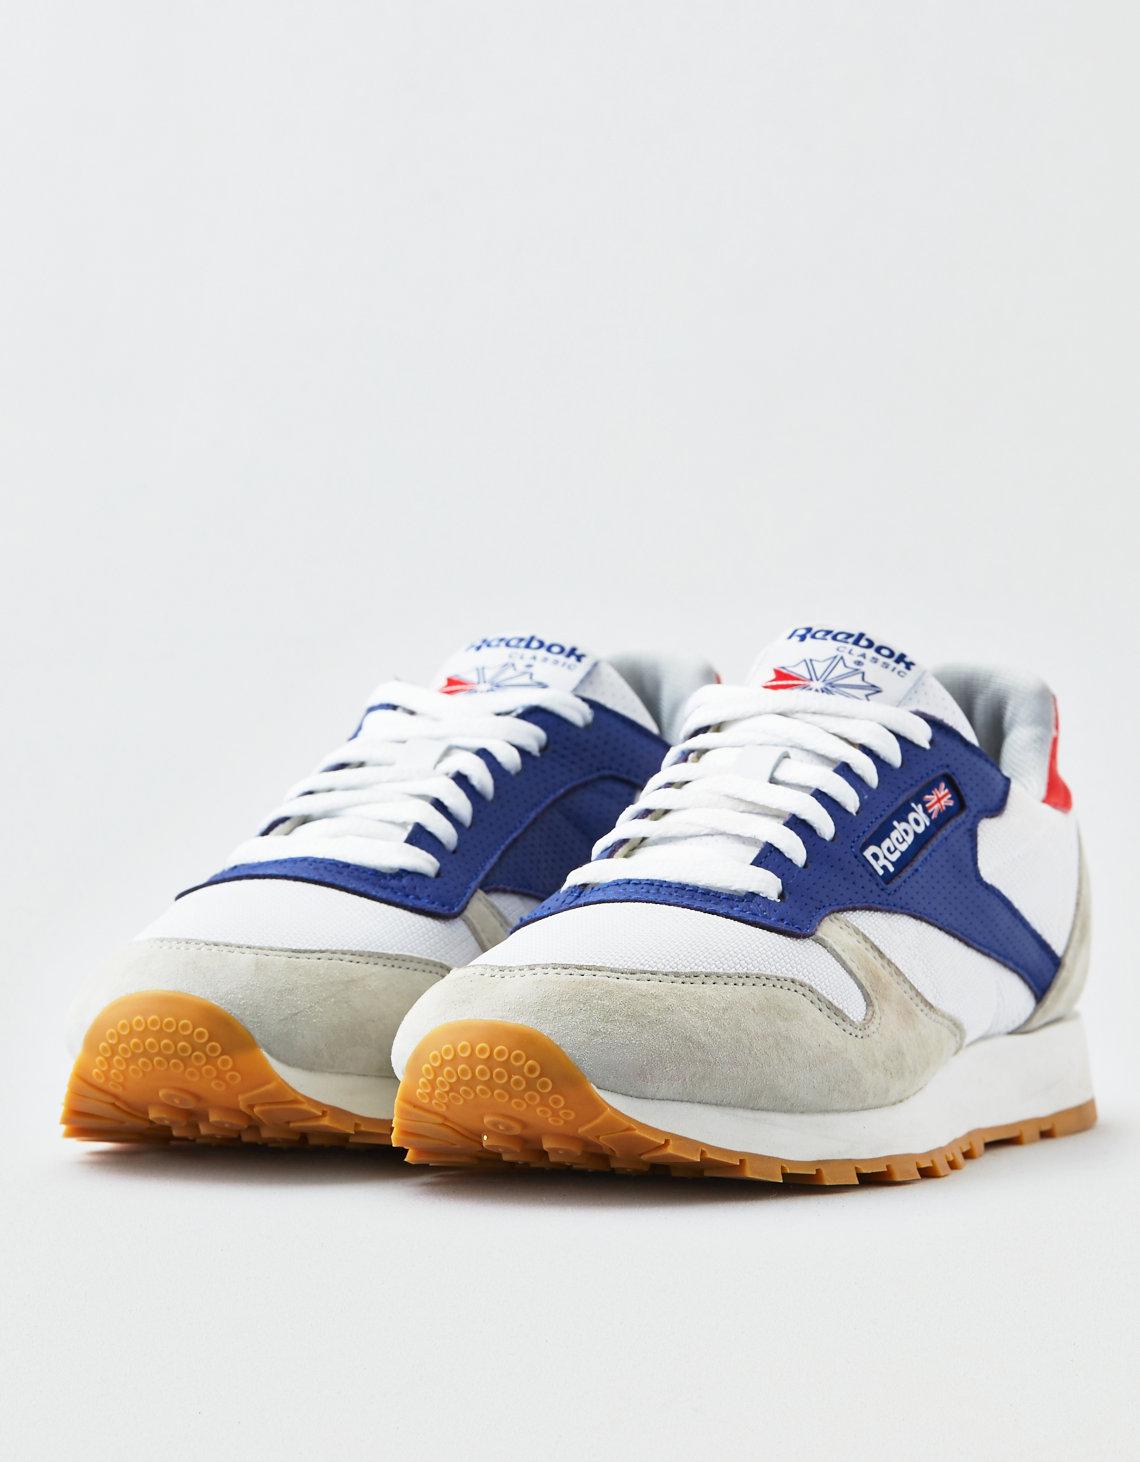 reebok classic limited edition